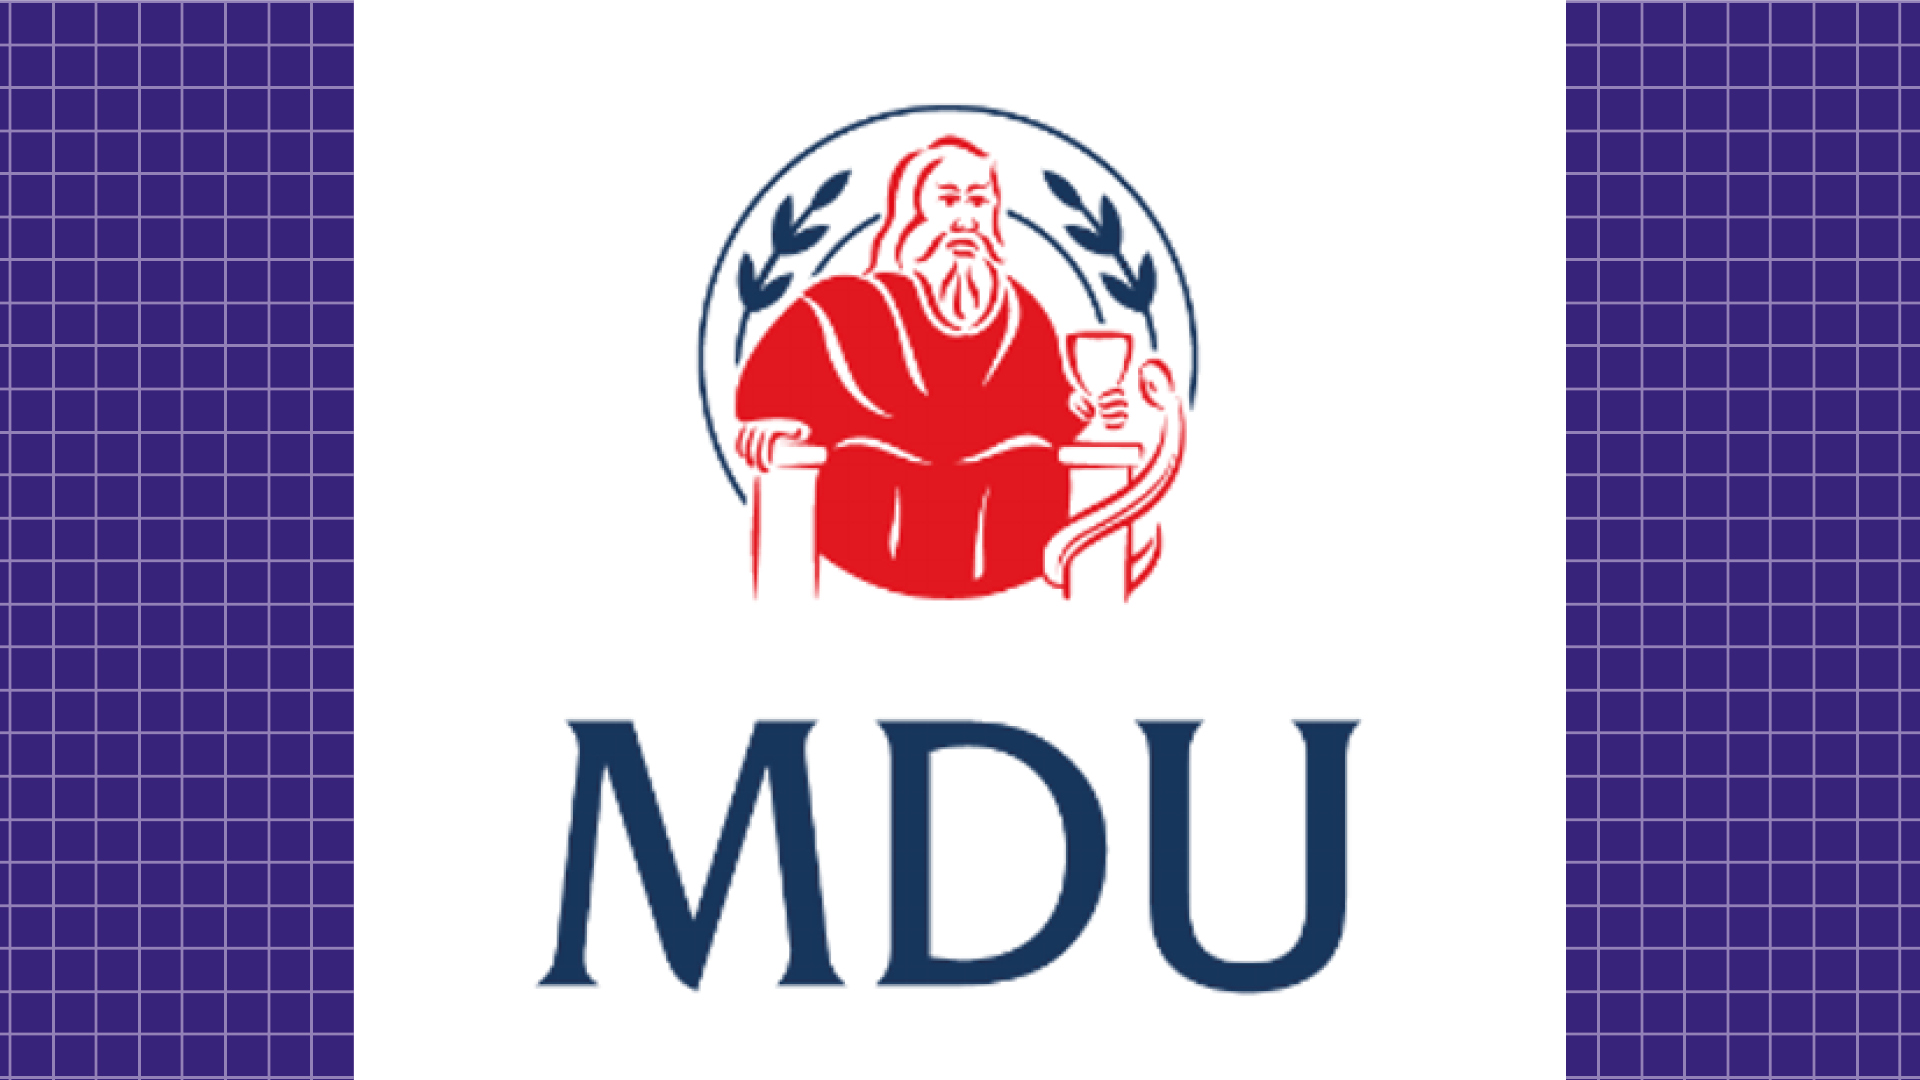 MDU foundation doctor members raise over £35,000